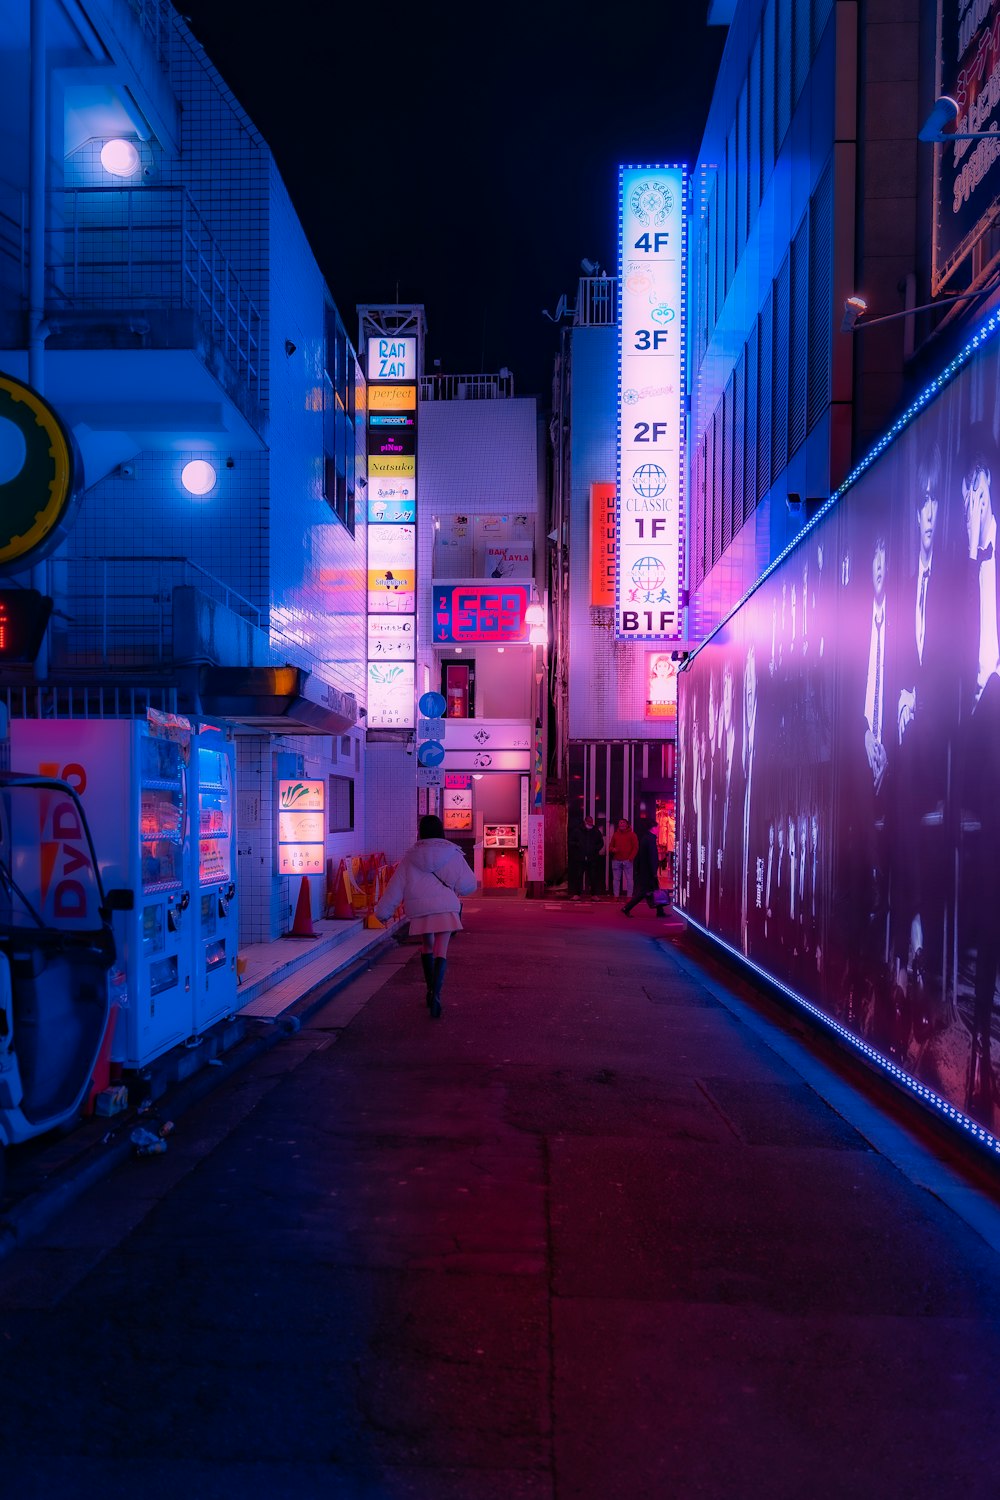 a person walking down a city street at night